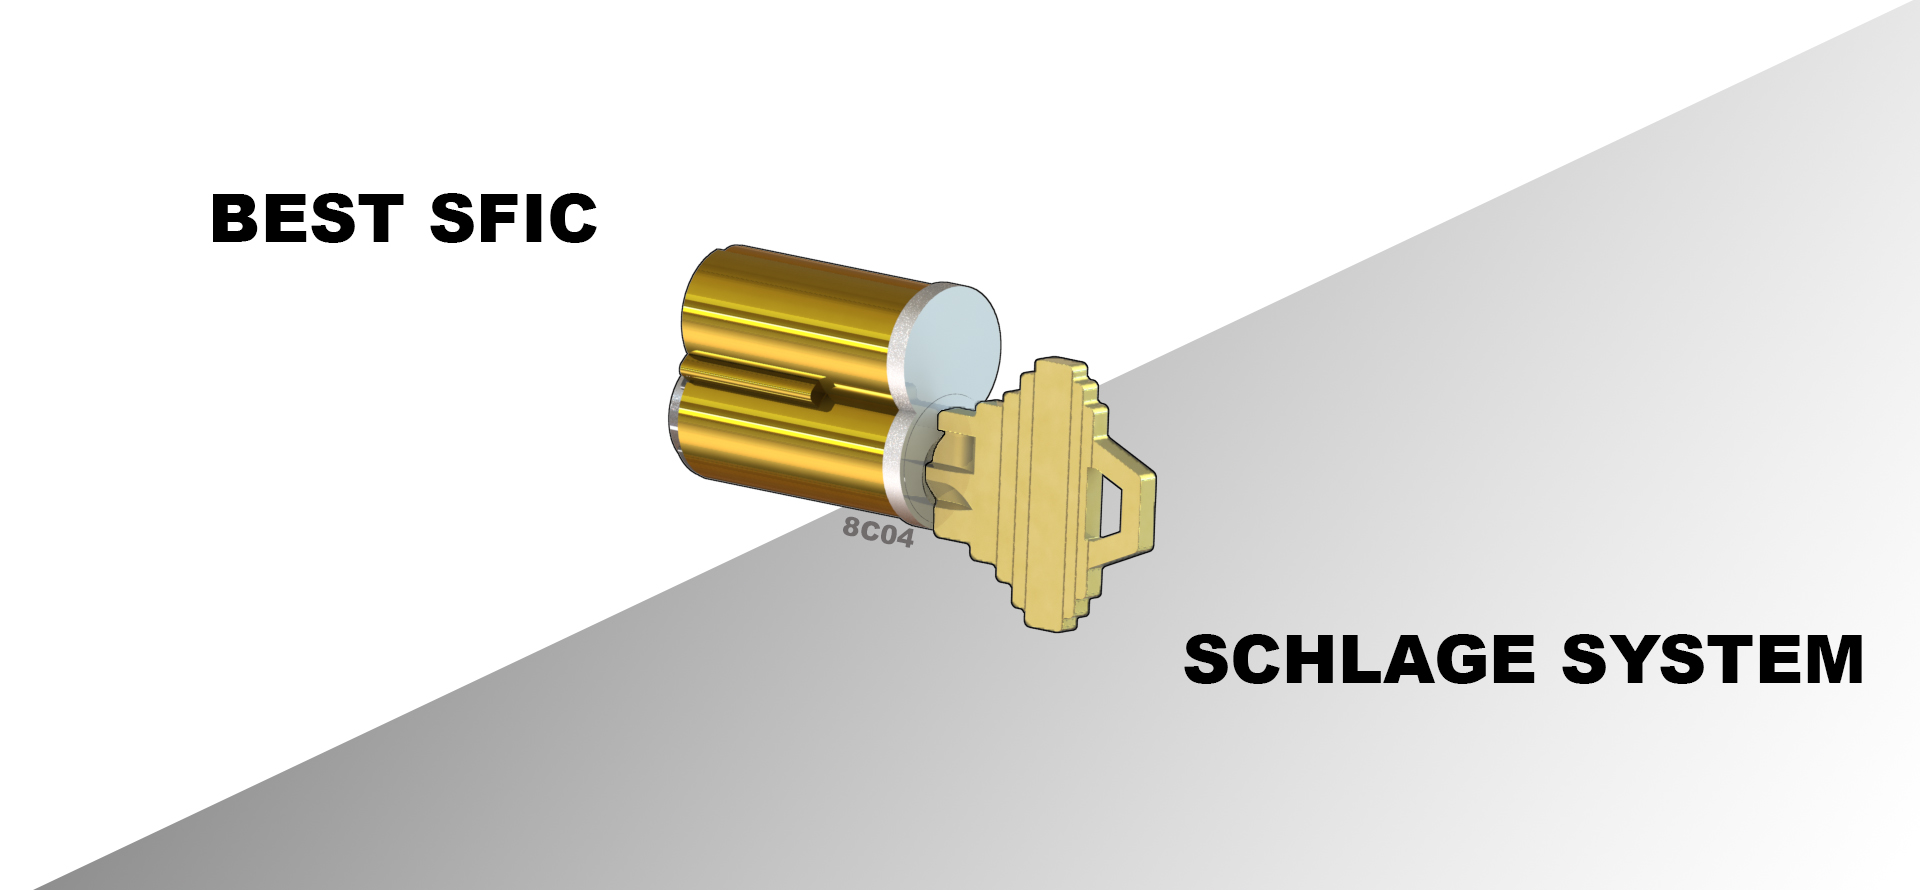 Load video: 8C04-SFIC operating with Schlage Keys